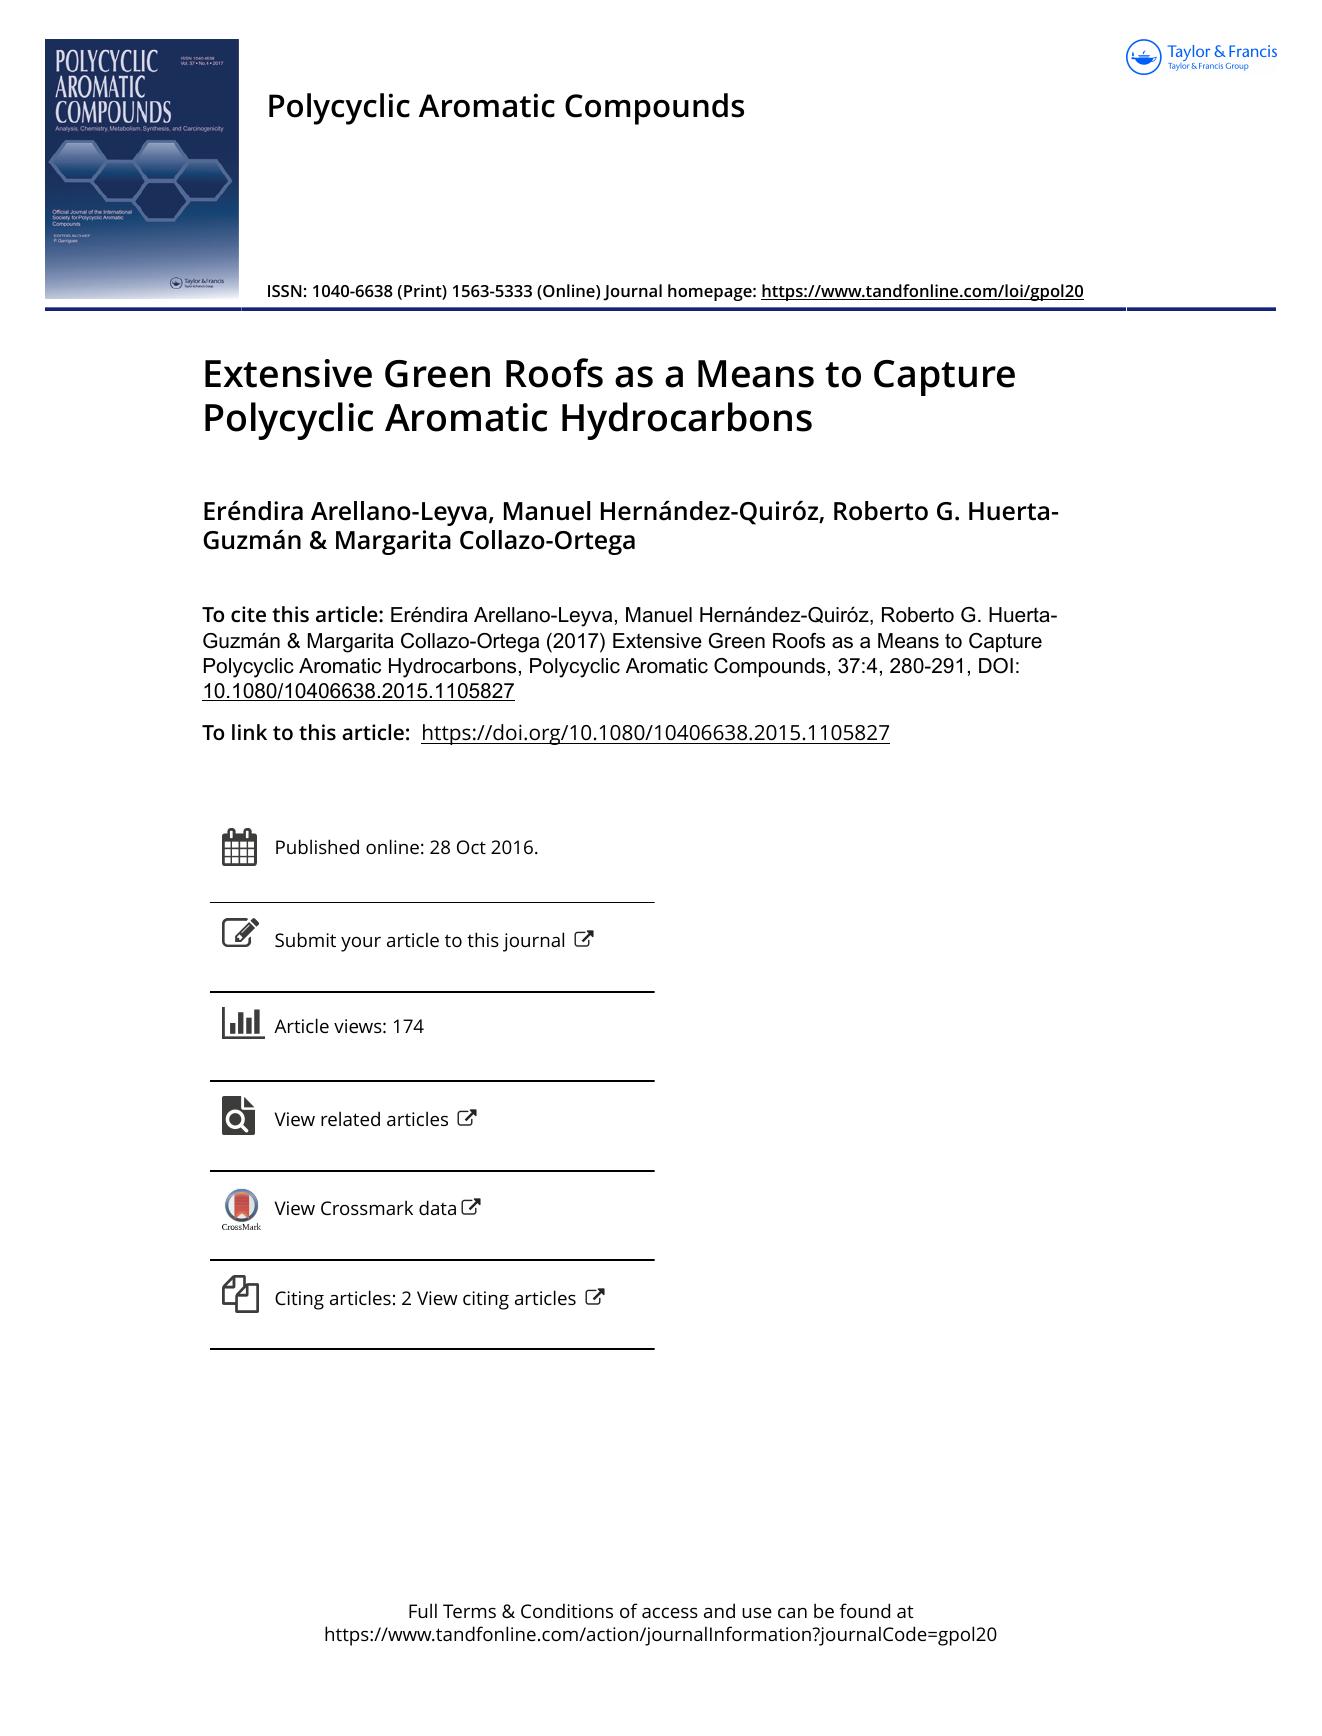 Extensive Green Roofs as a Means to Capture Polycyclic Aromatic Hydrocarbons by unknow